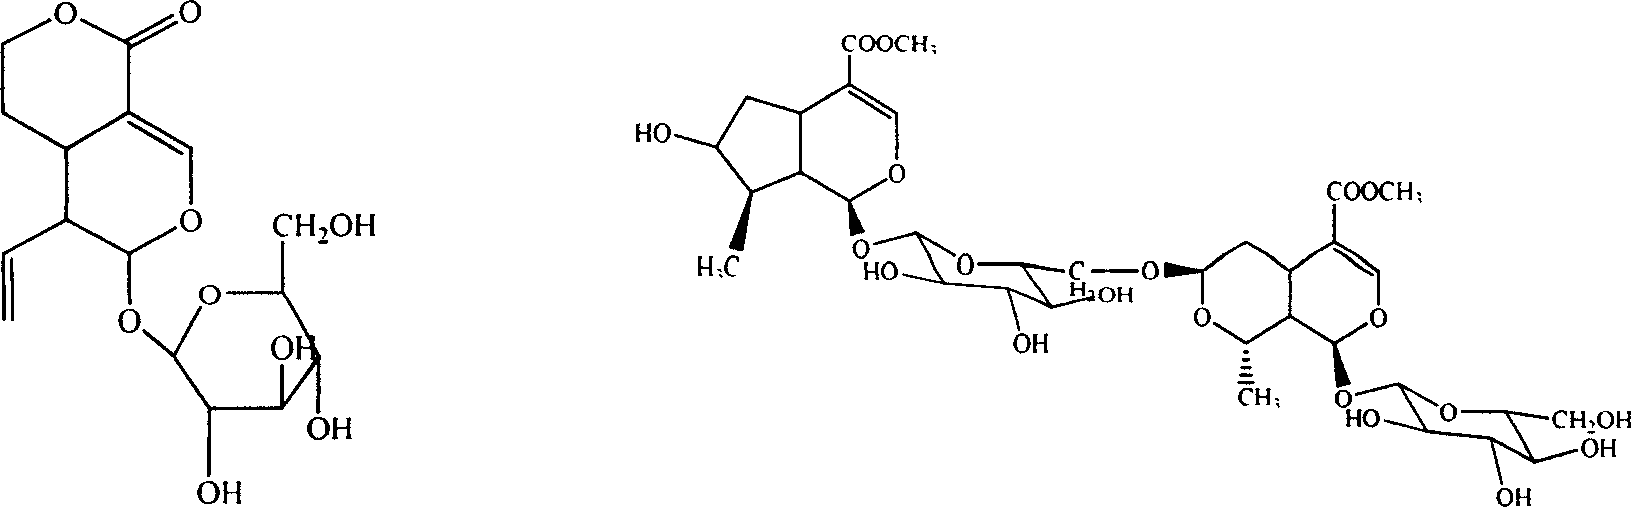 Process of simultaneously extracting and detecting cornus cyclic olefine ether terpinyl side like extractive